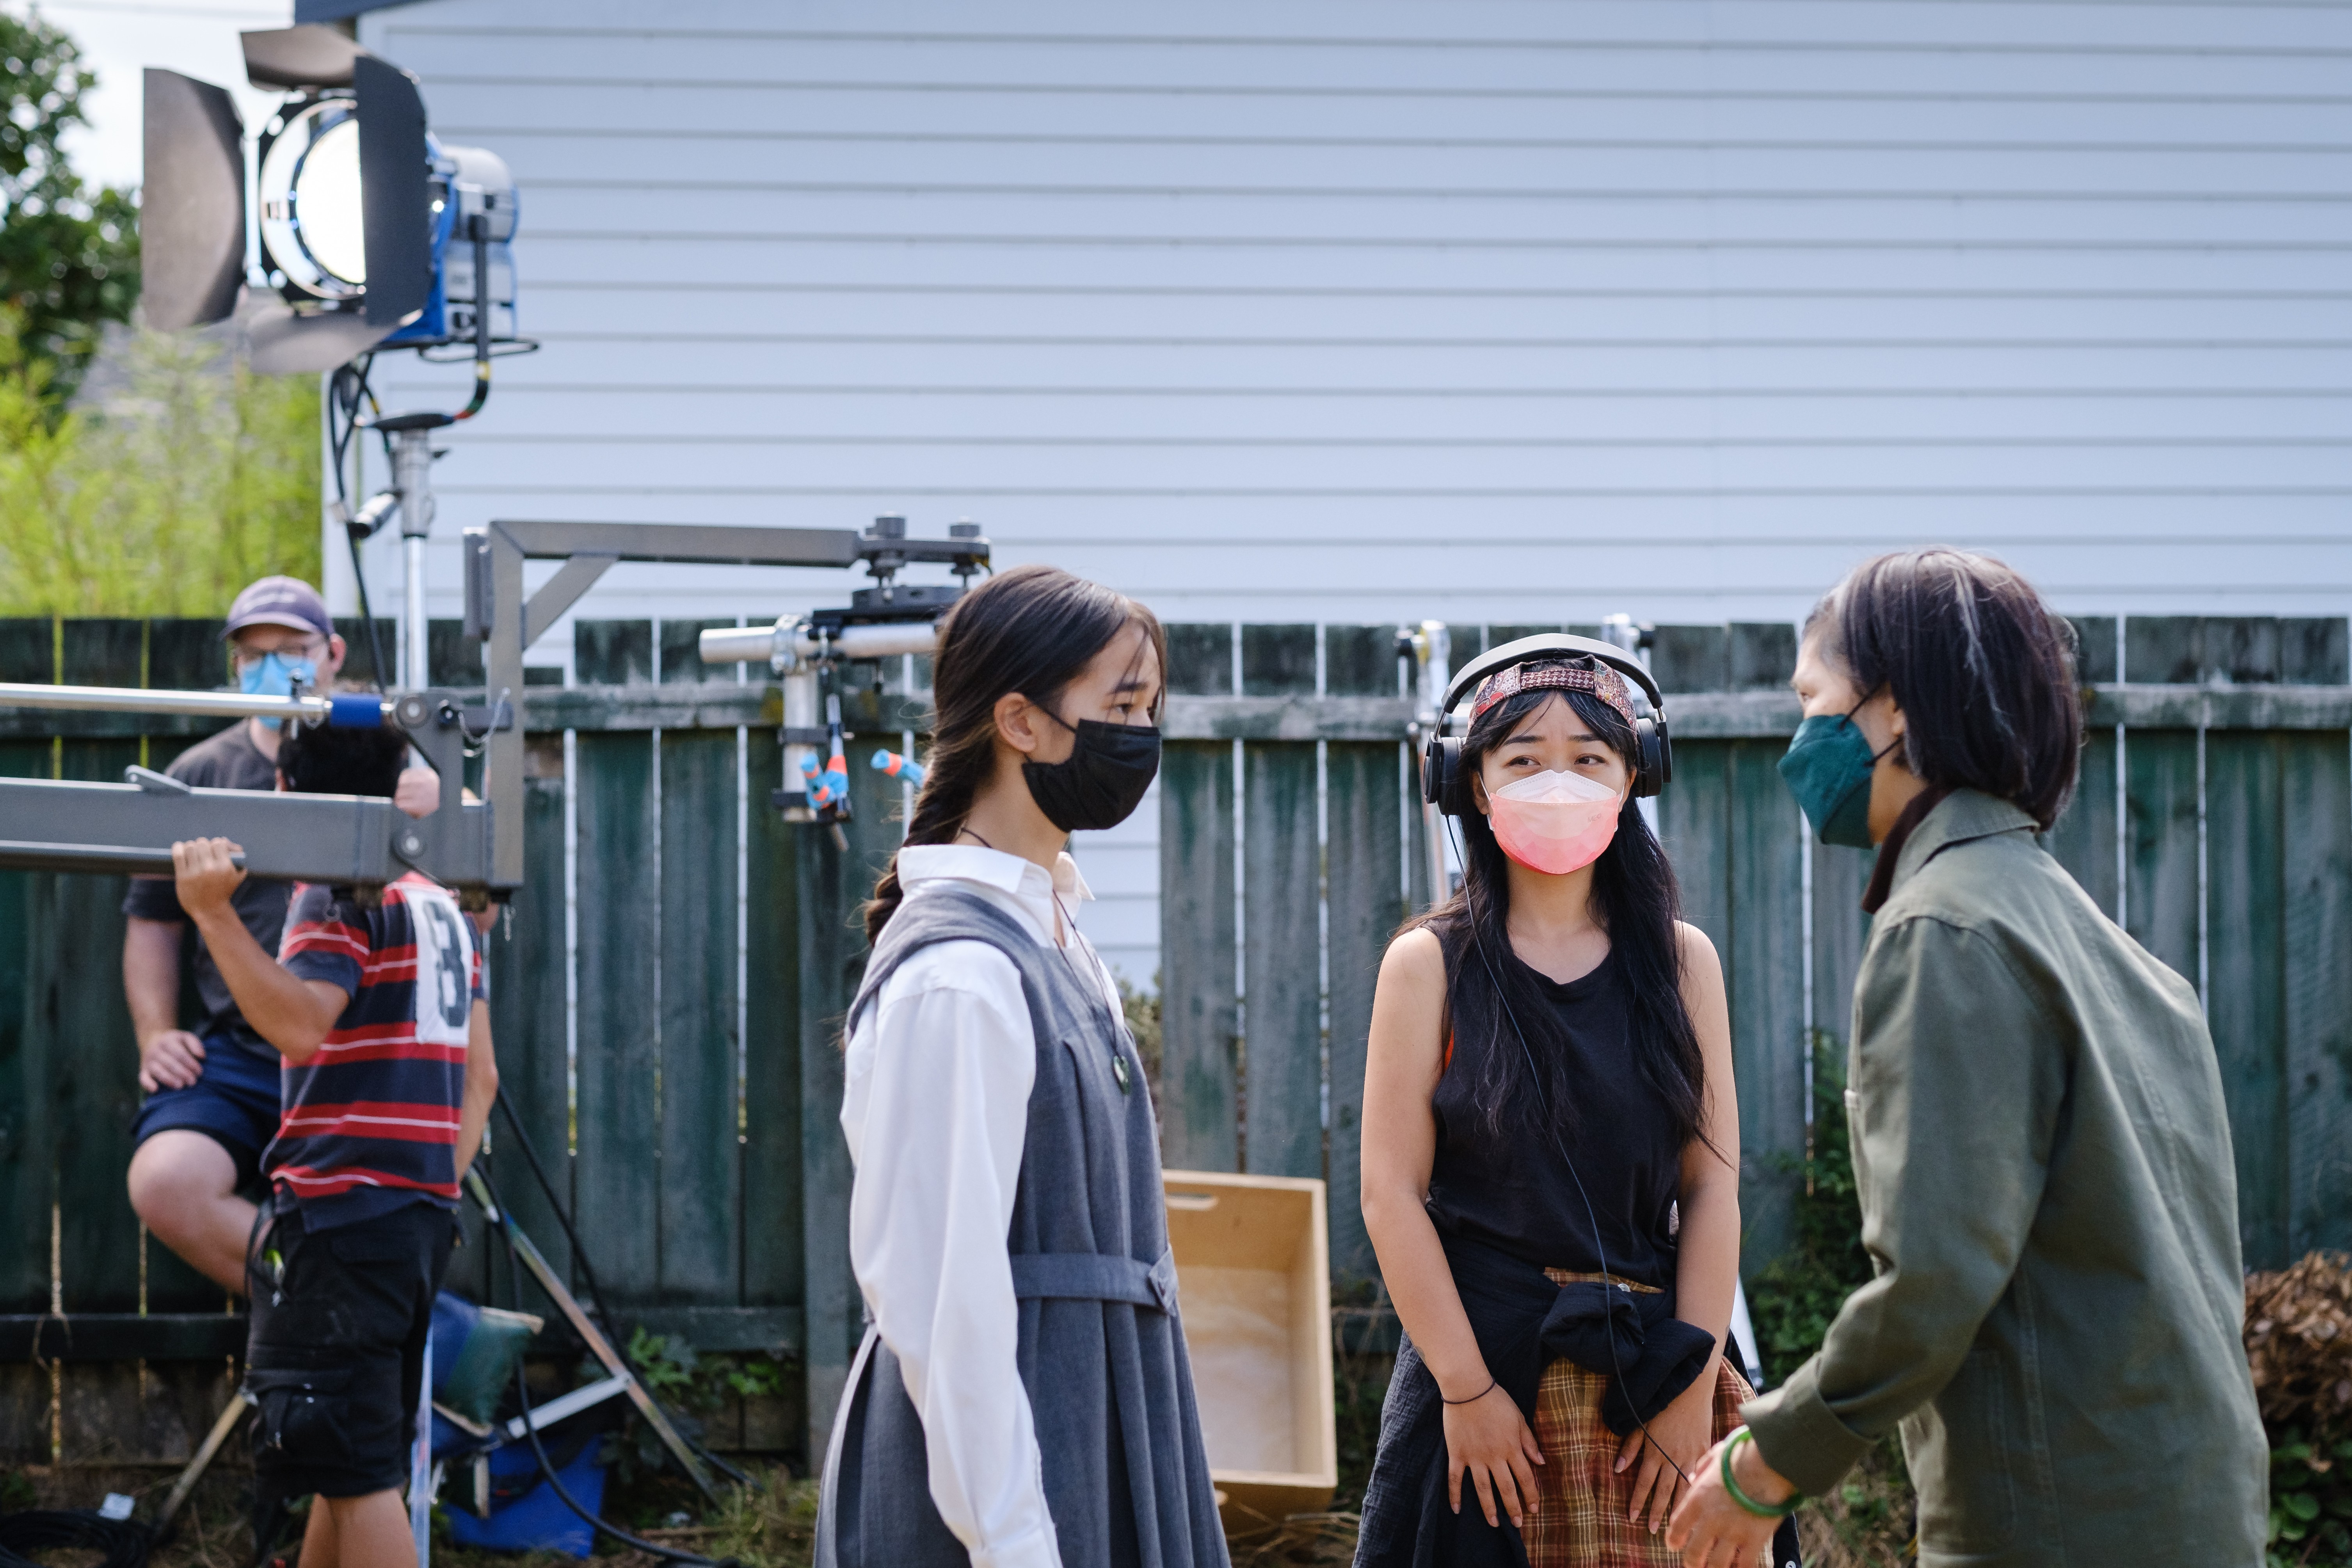 Three people standing outdoors on a film set in masks